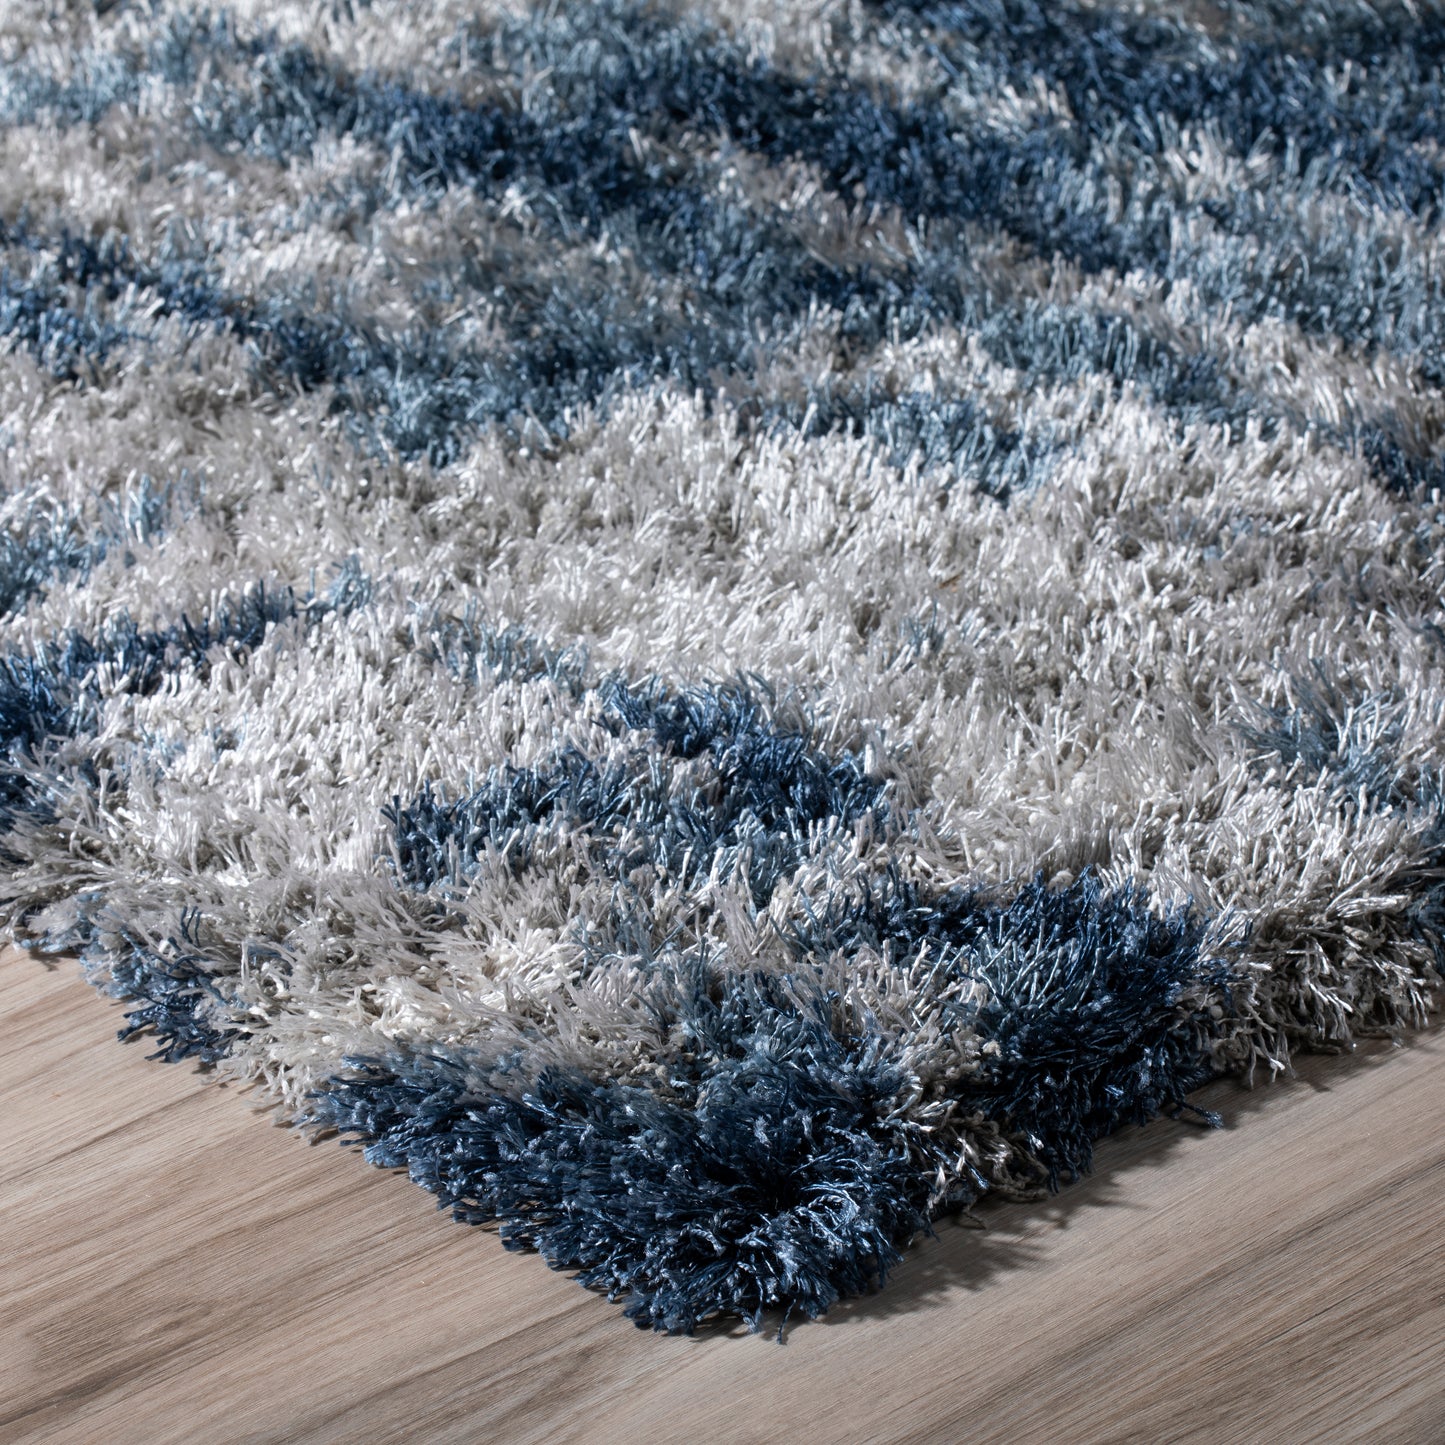 Arturro AT11 Machine Made Synthetic Blend Indoor Area Rug by Dalyn Rugs